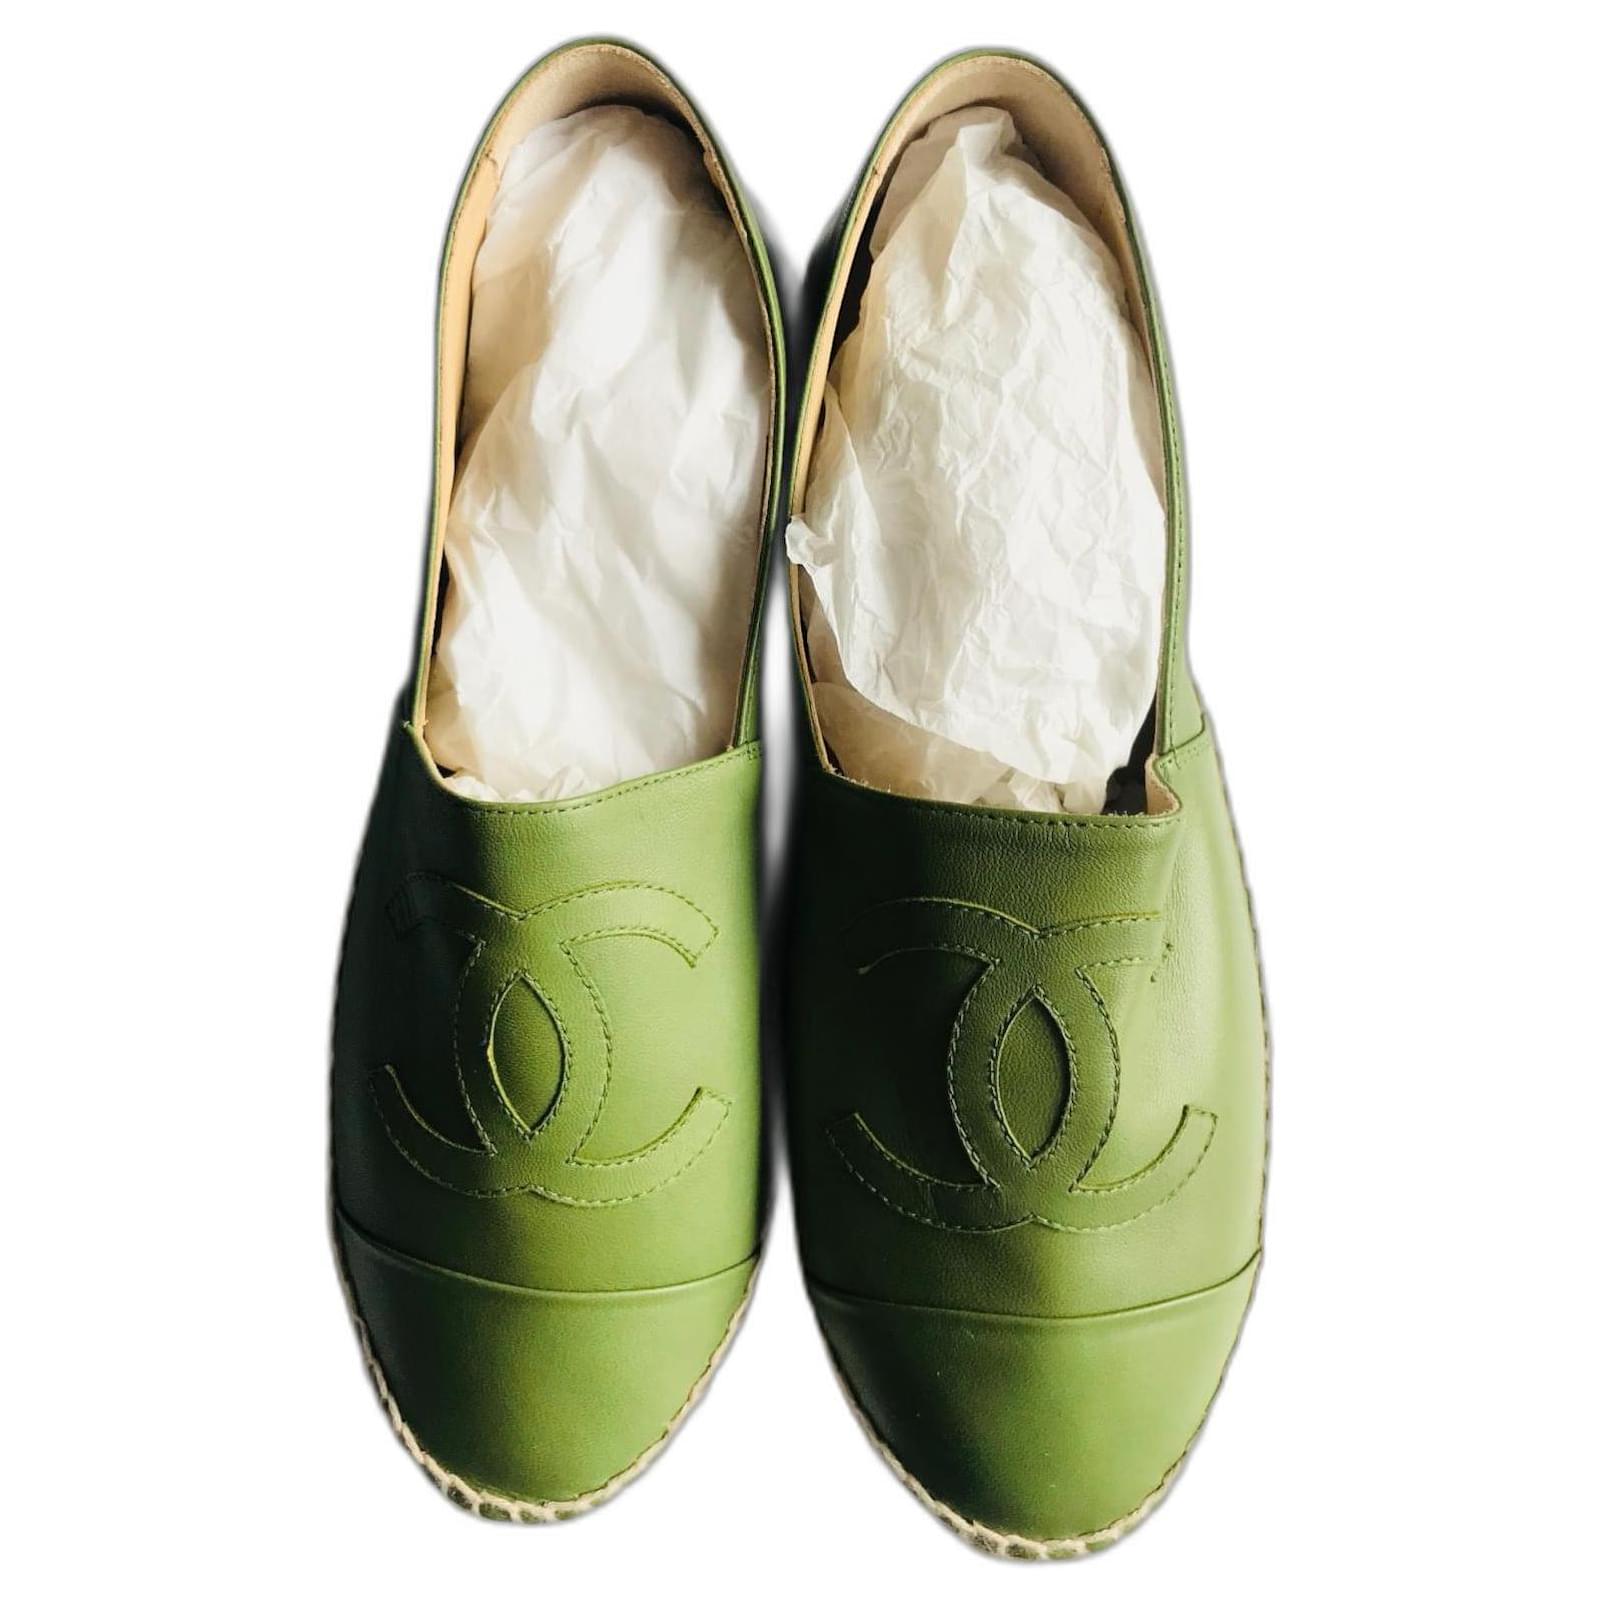 Chanel Green Leather Espadrilles